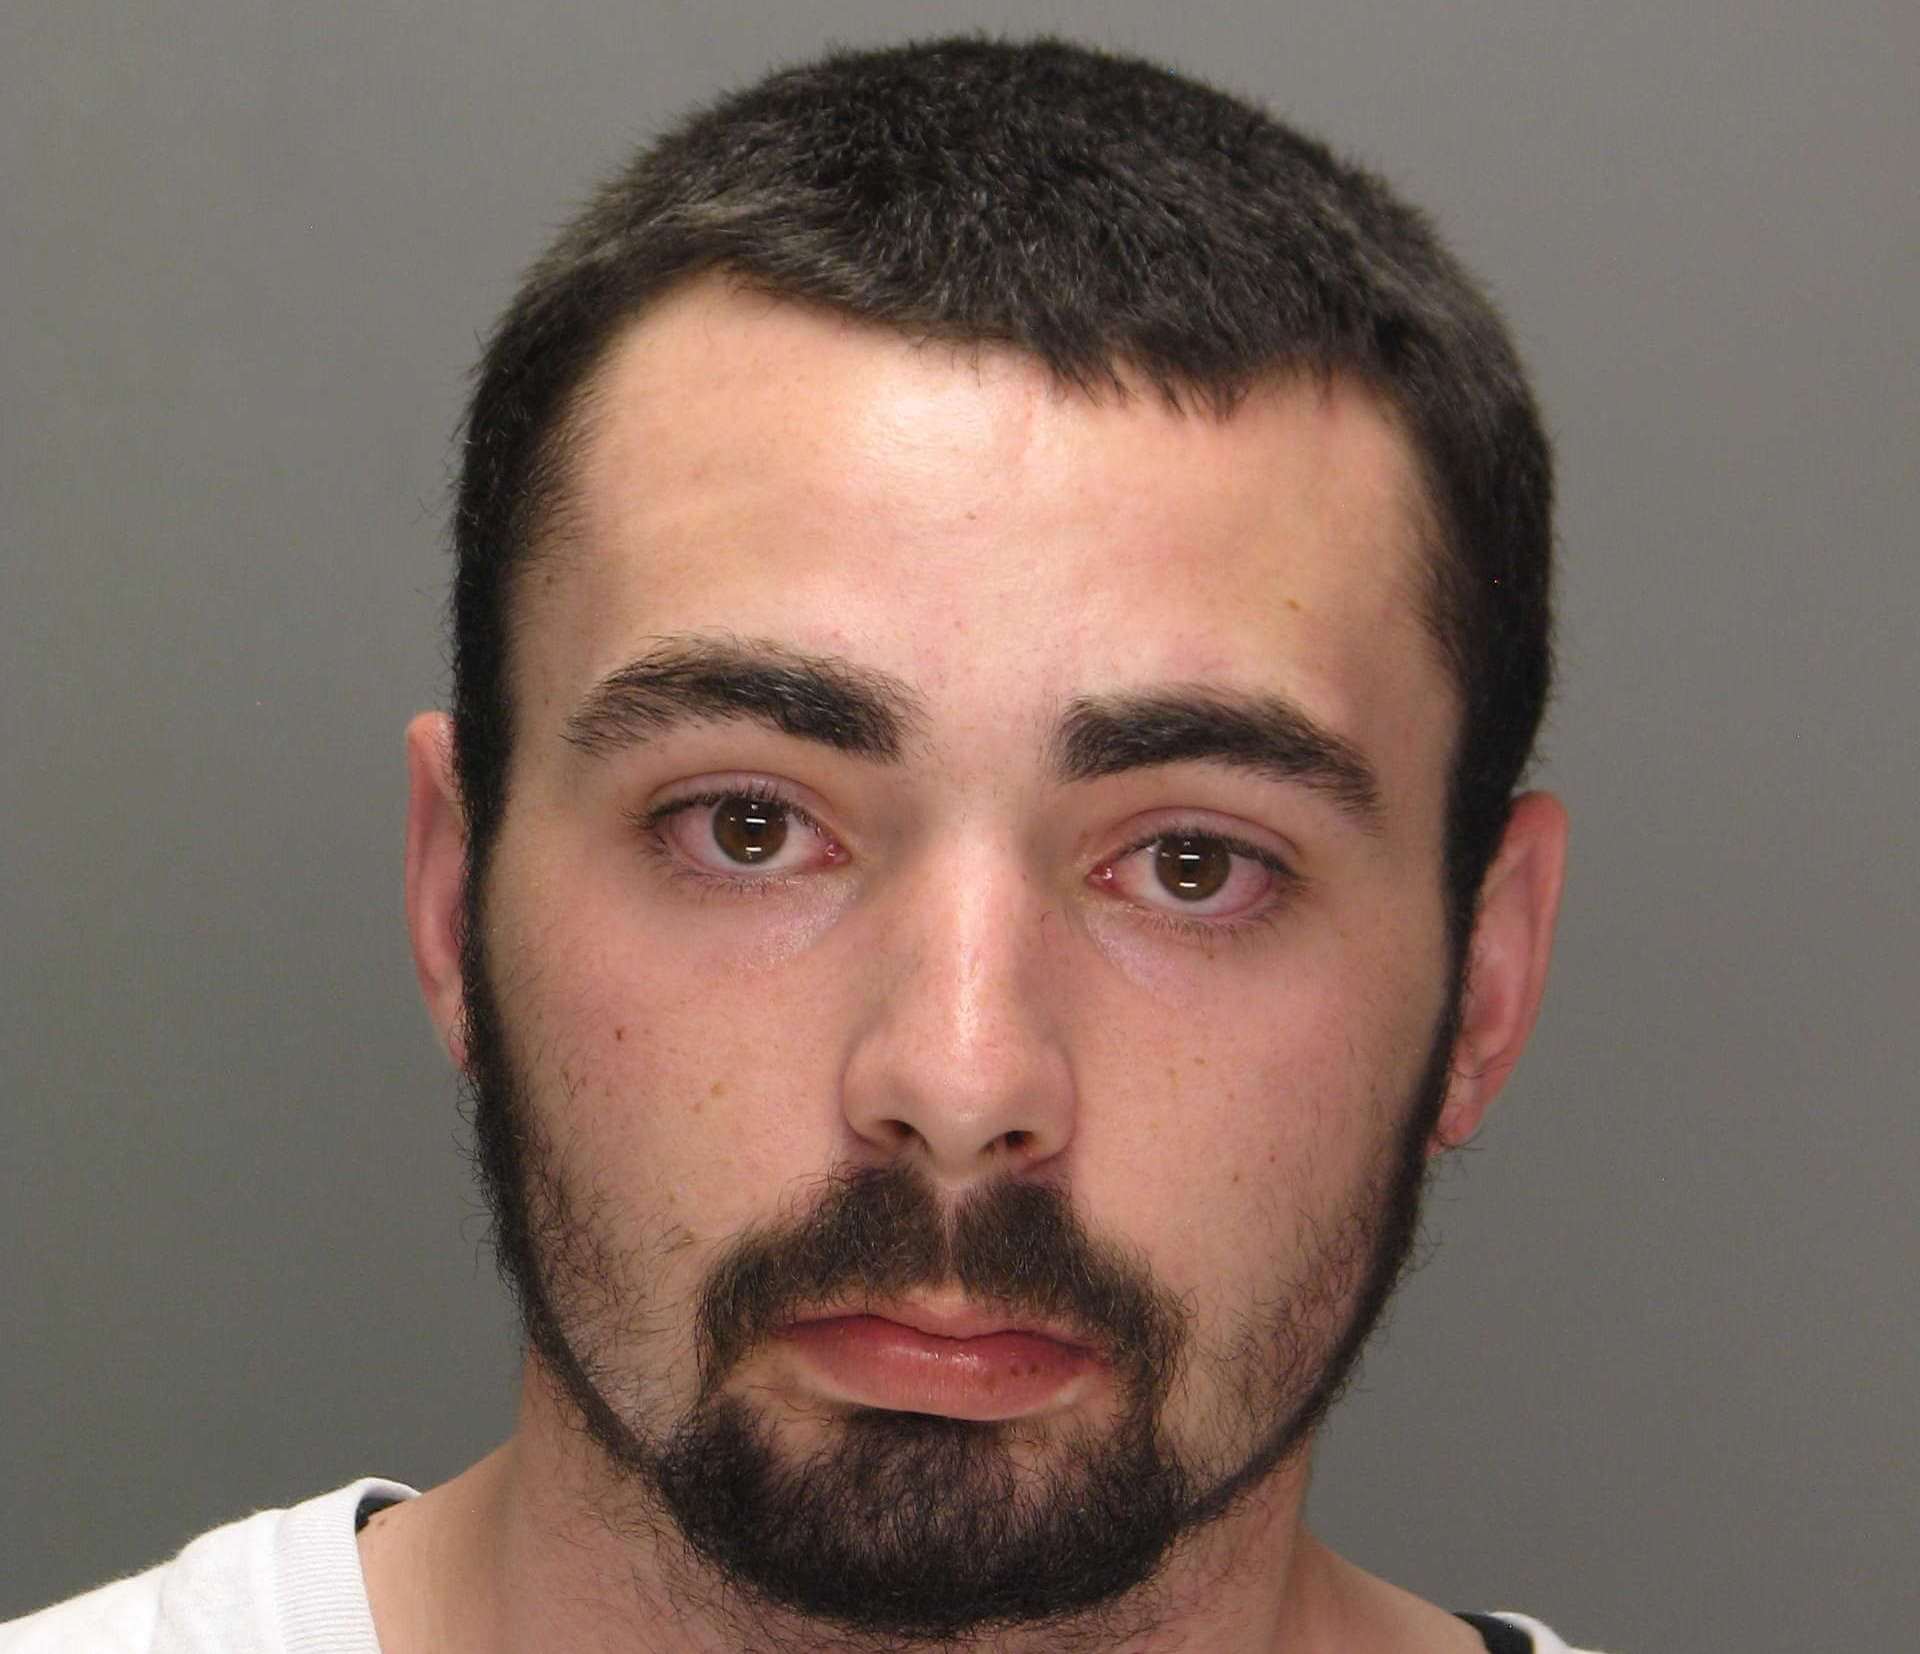 [CREDIT: WPD] Warwick Police have arrested and charged Thomas Leamy, 25, of Warwick, RI, with felony assault and/or battery and driving on a suspended license in a May 26 Adams Street hit & run.